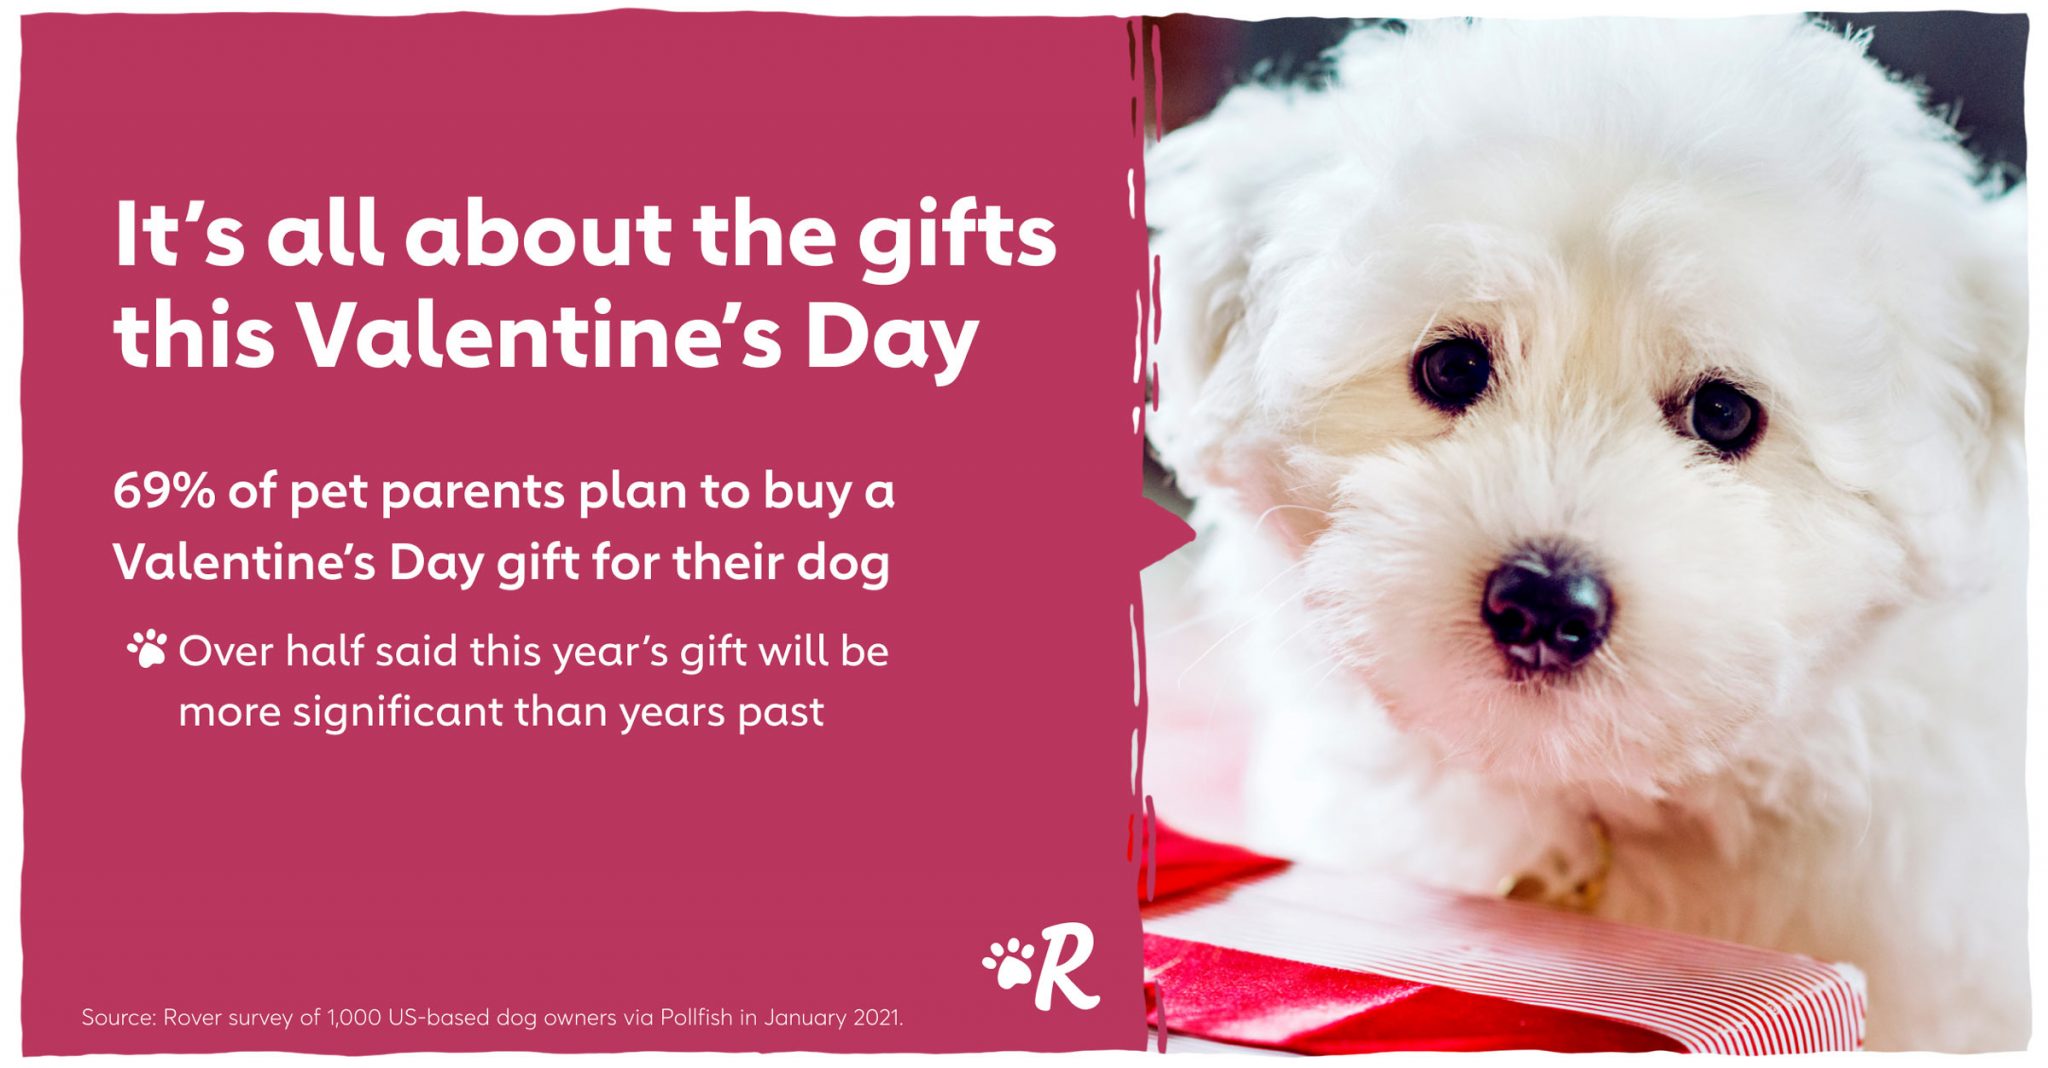 A fluffy white dog and a pink background and white text saying that people love to buy their dogs gifts on Valentine's Day